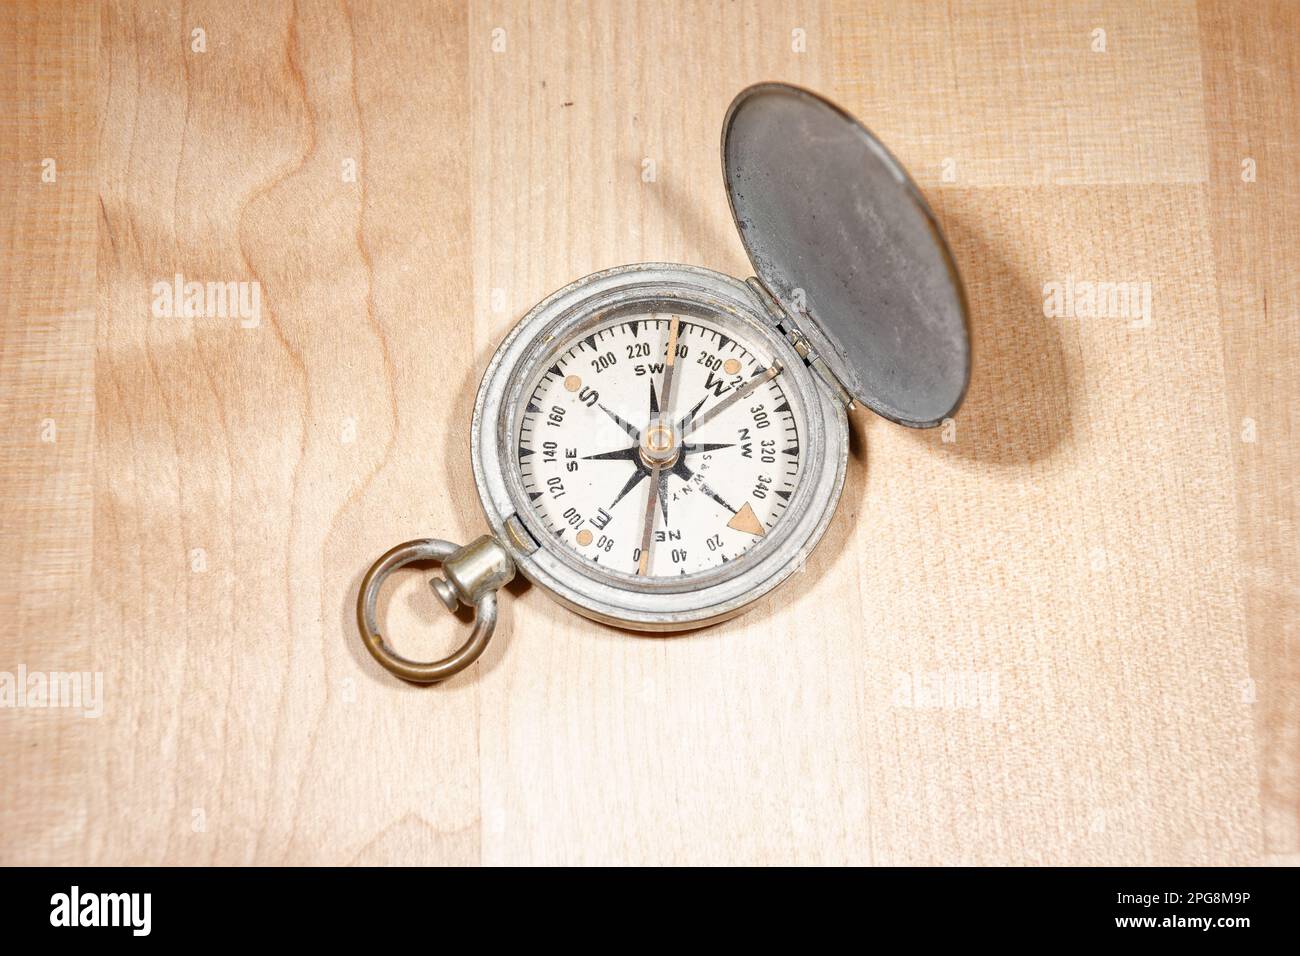 Open old vintage compass on wooden table Stock Photo